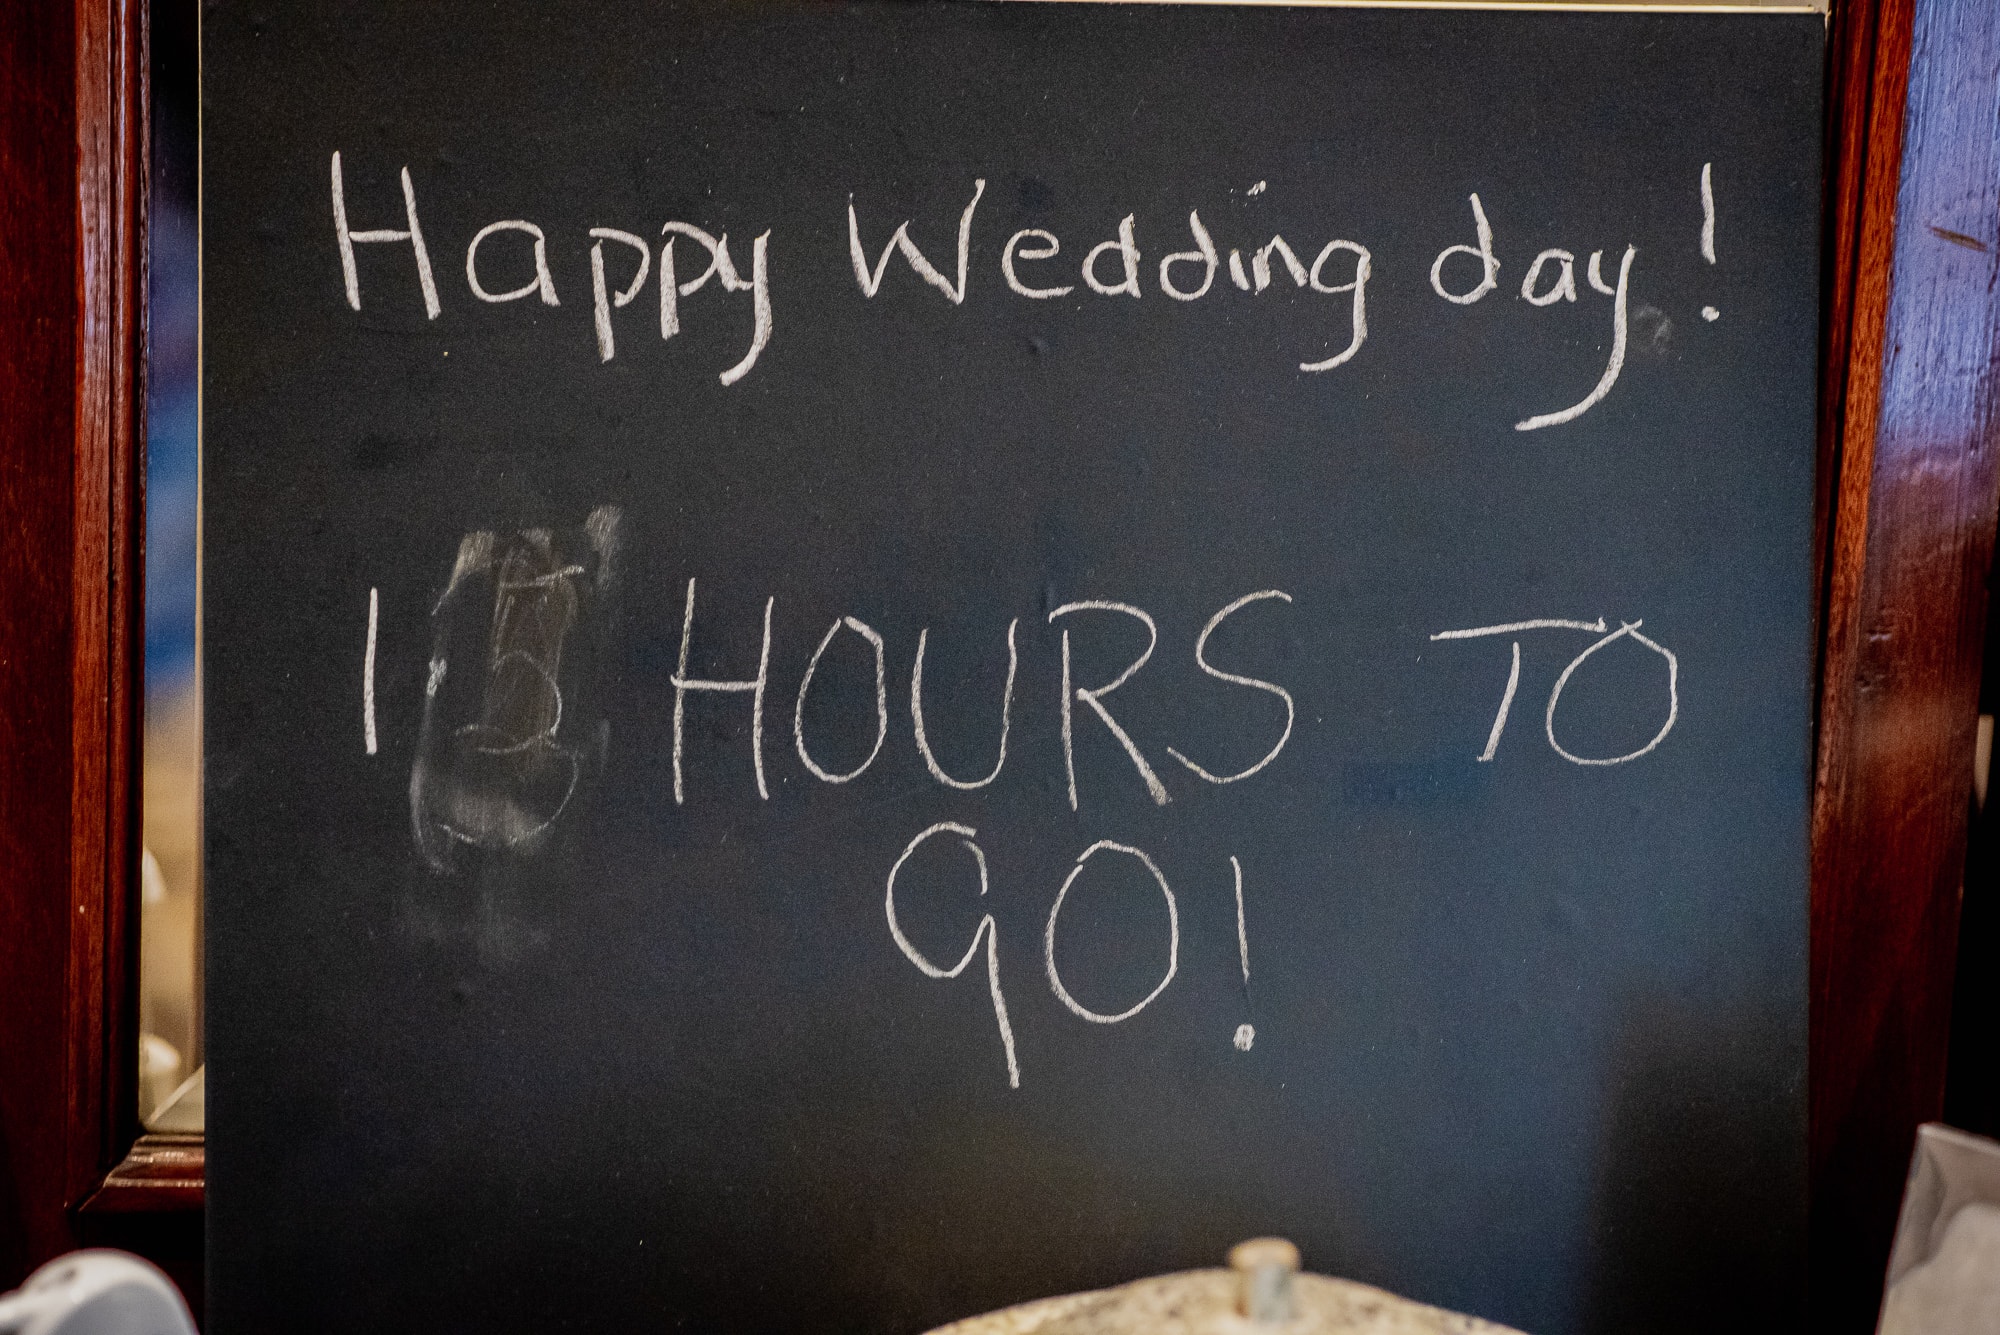 Hours to go until Wedding Day